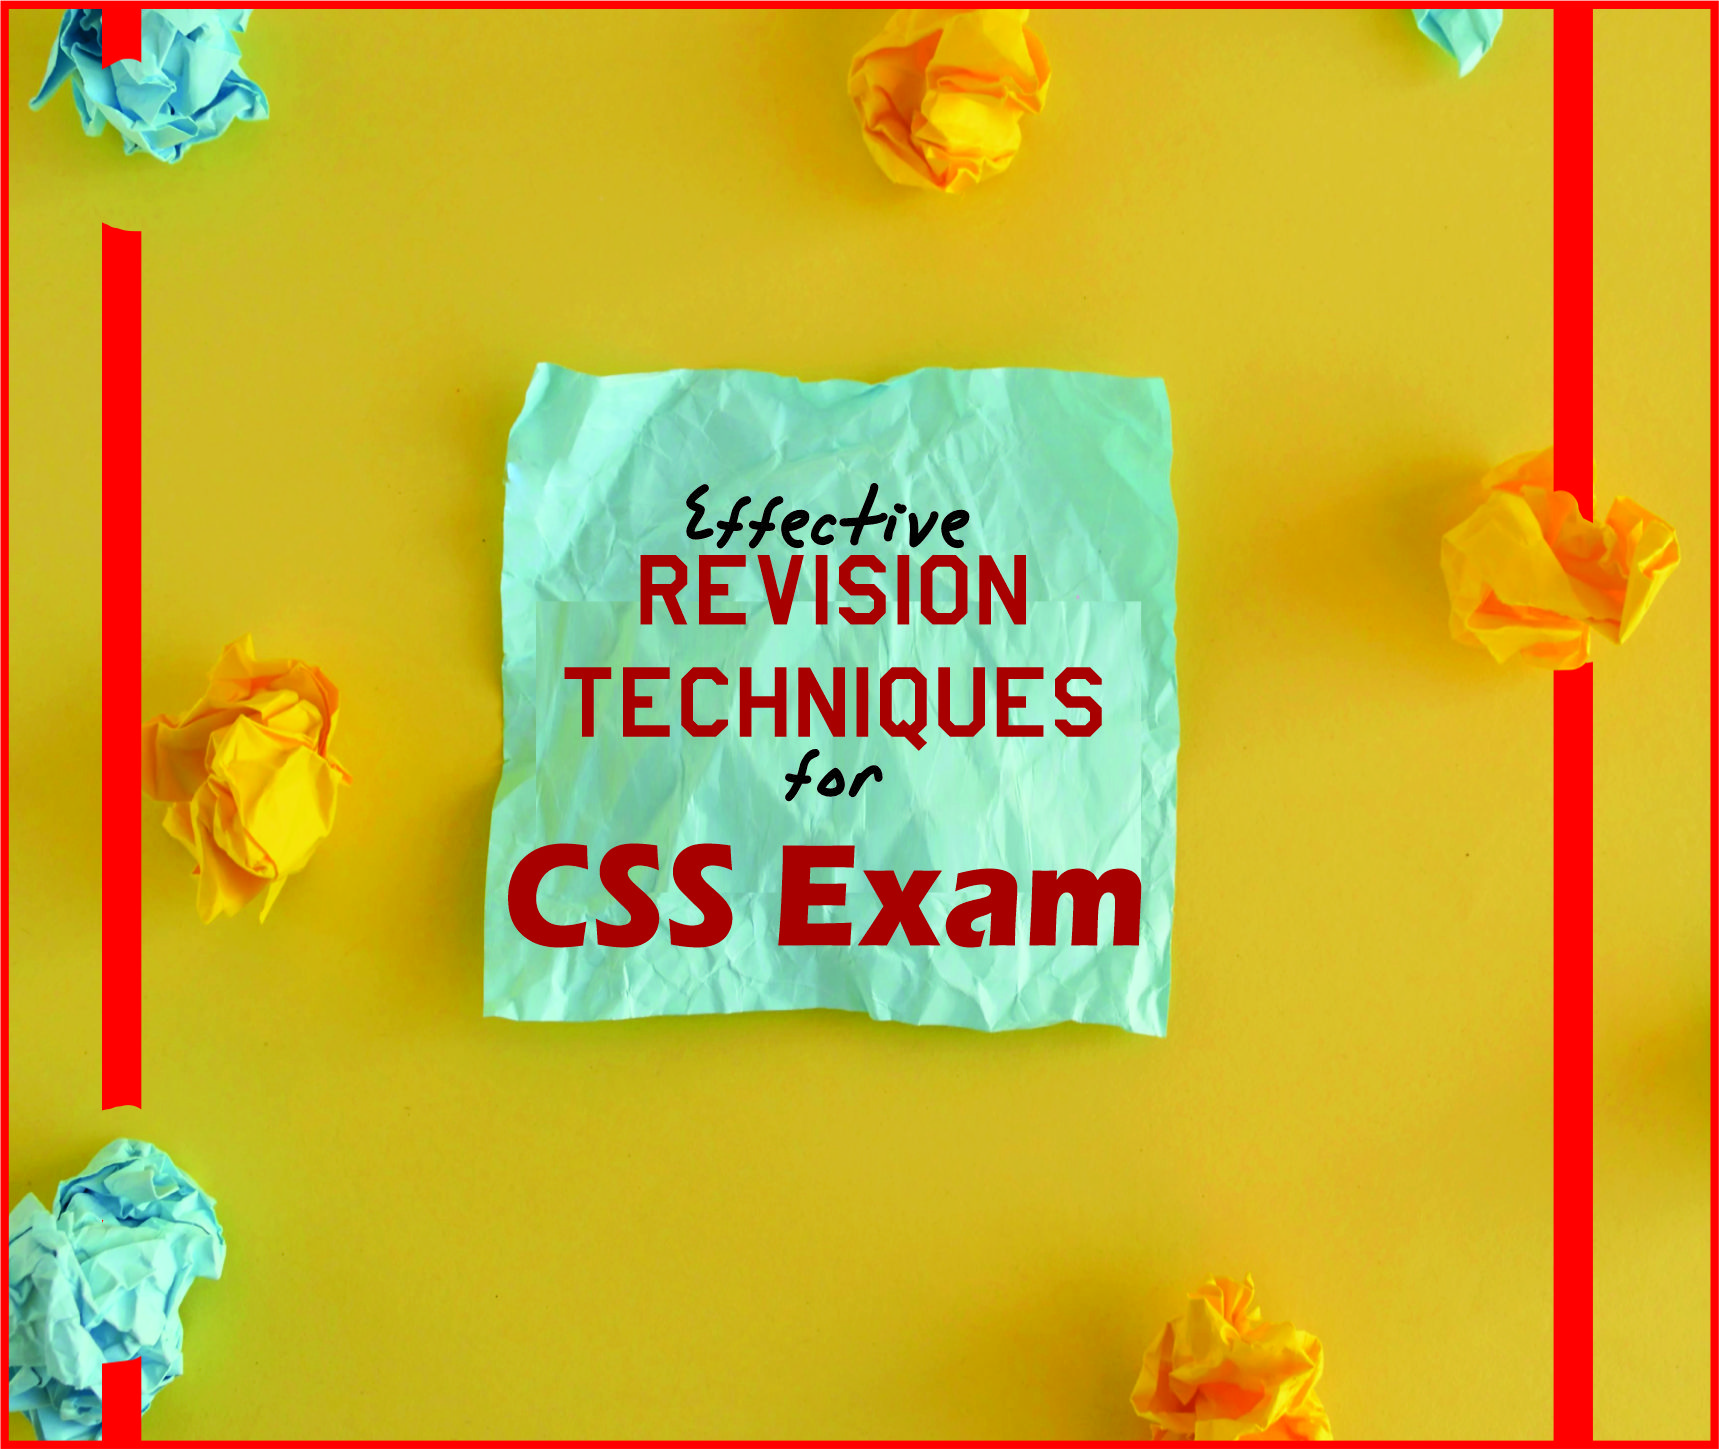 You are currently viewing Effective Revision Techniques for CSS Exam